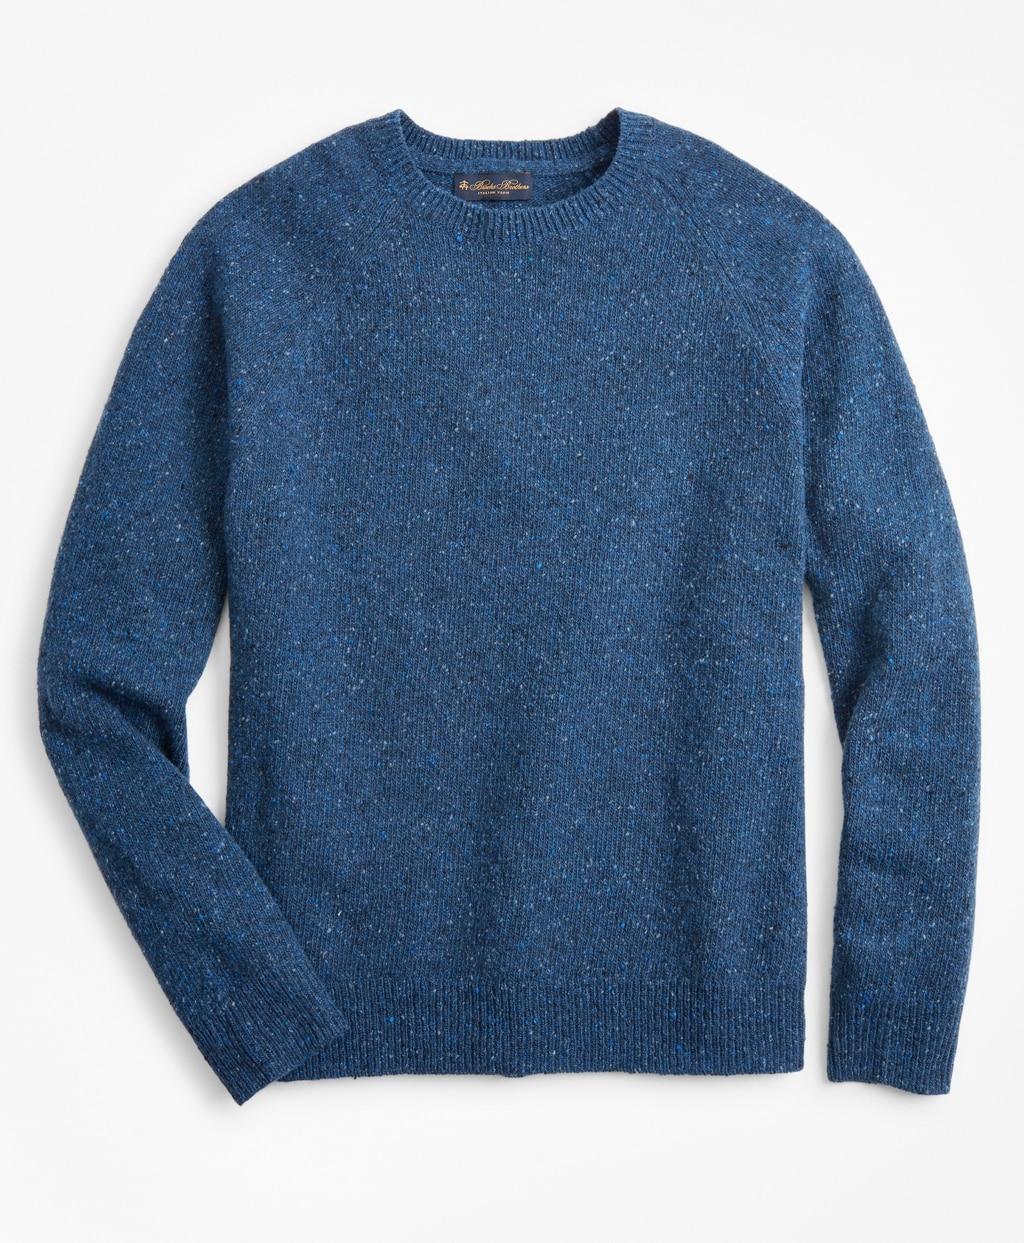 Brooks Brothers Merino Wool Donegal Raglan Crewneck Sweater in Blue for ...